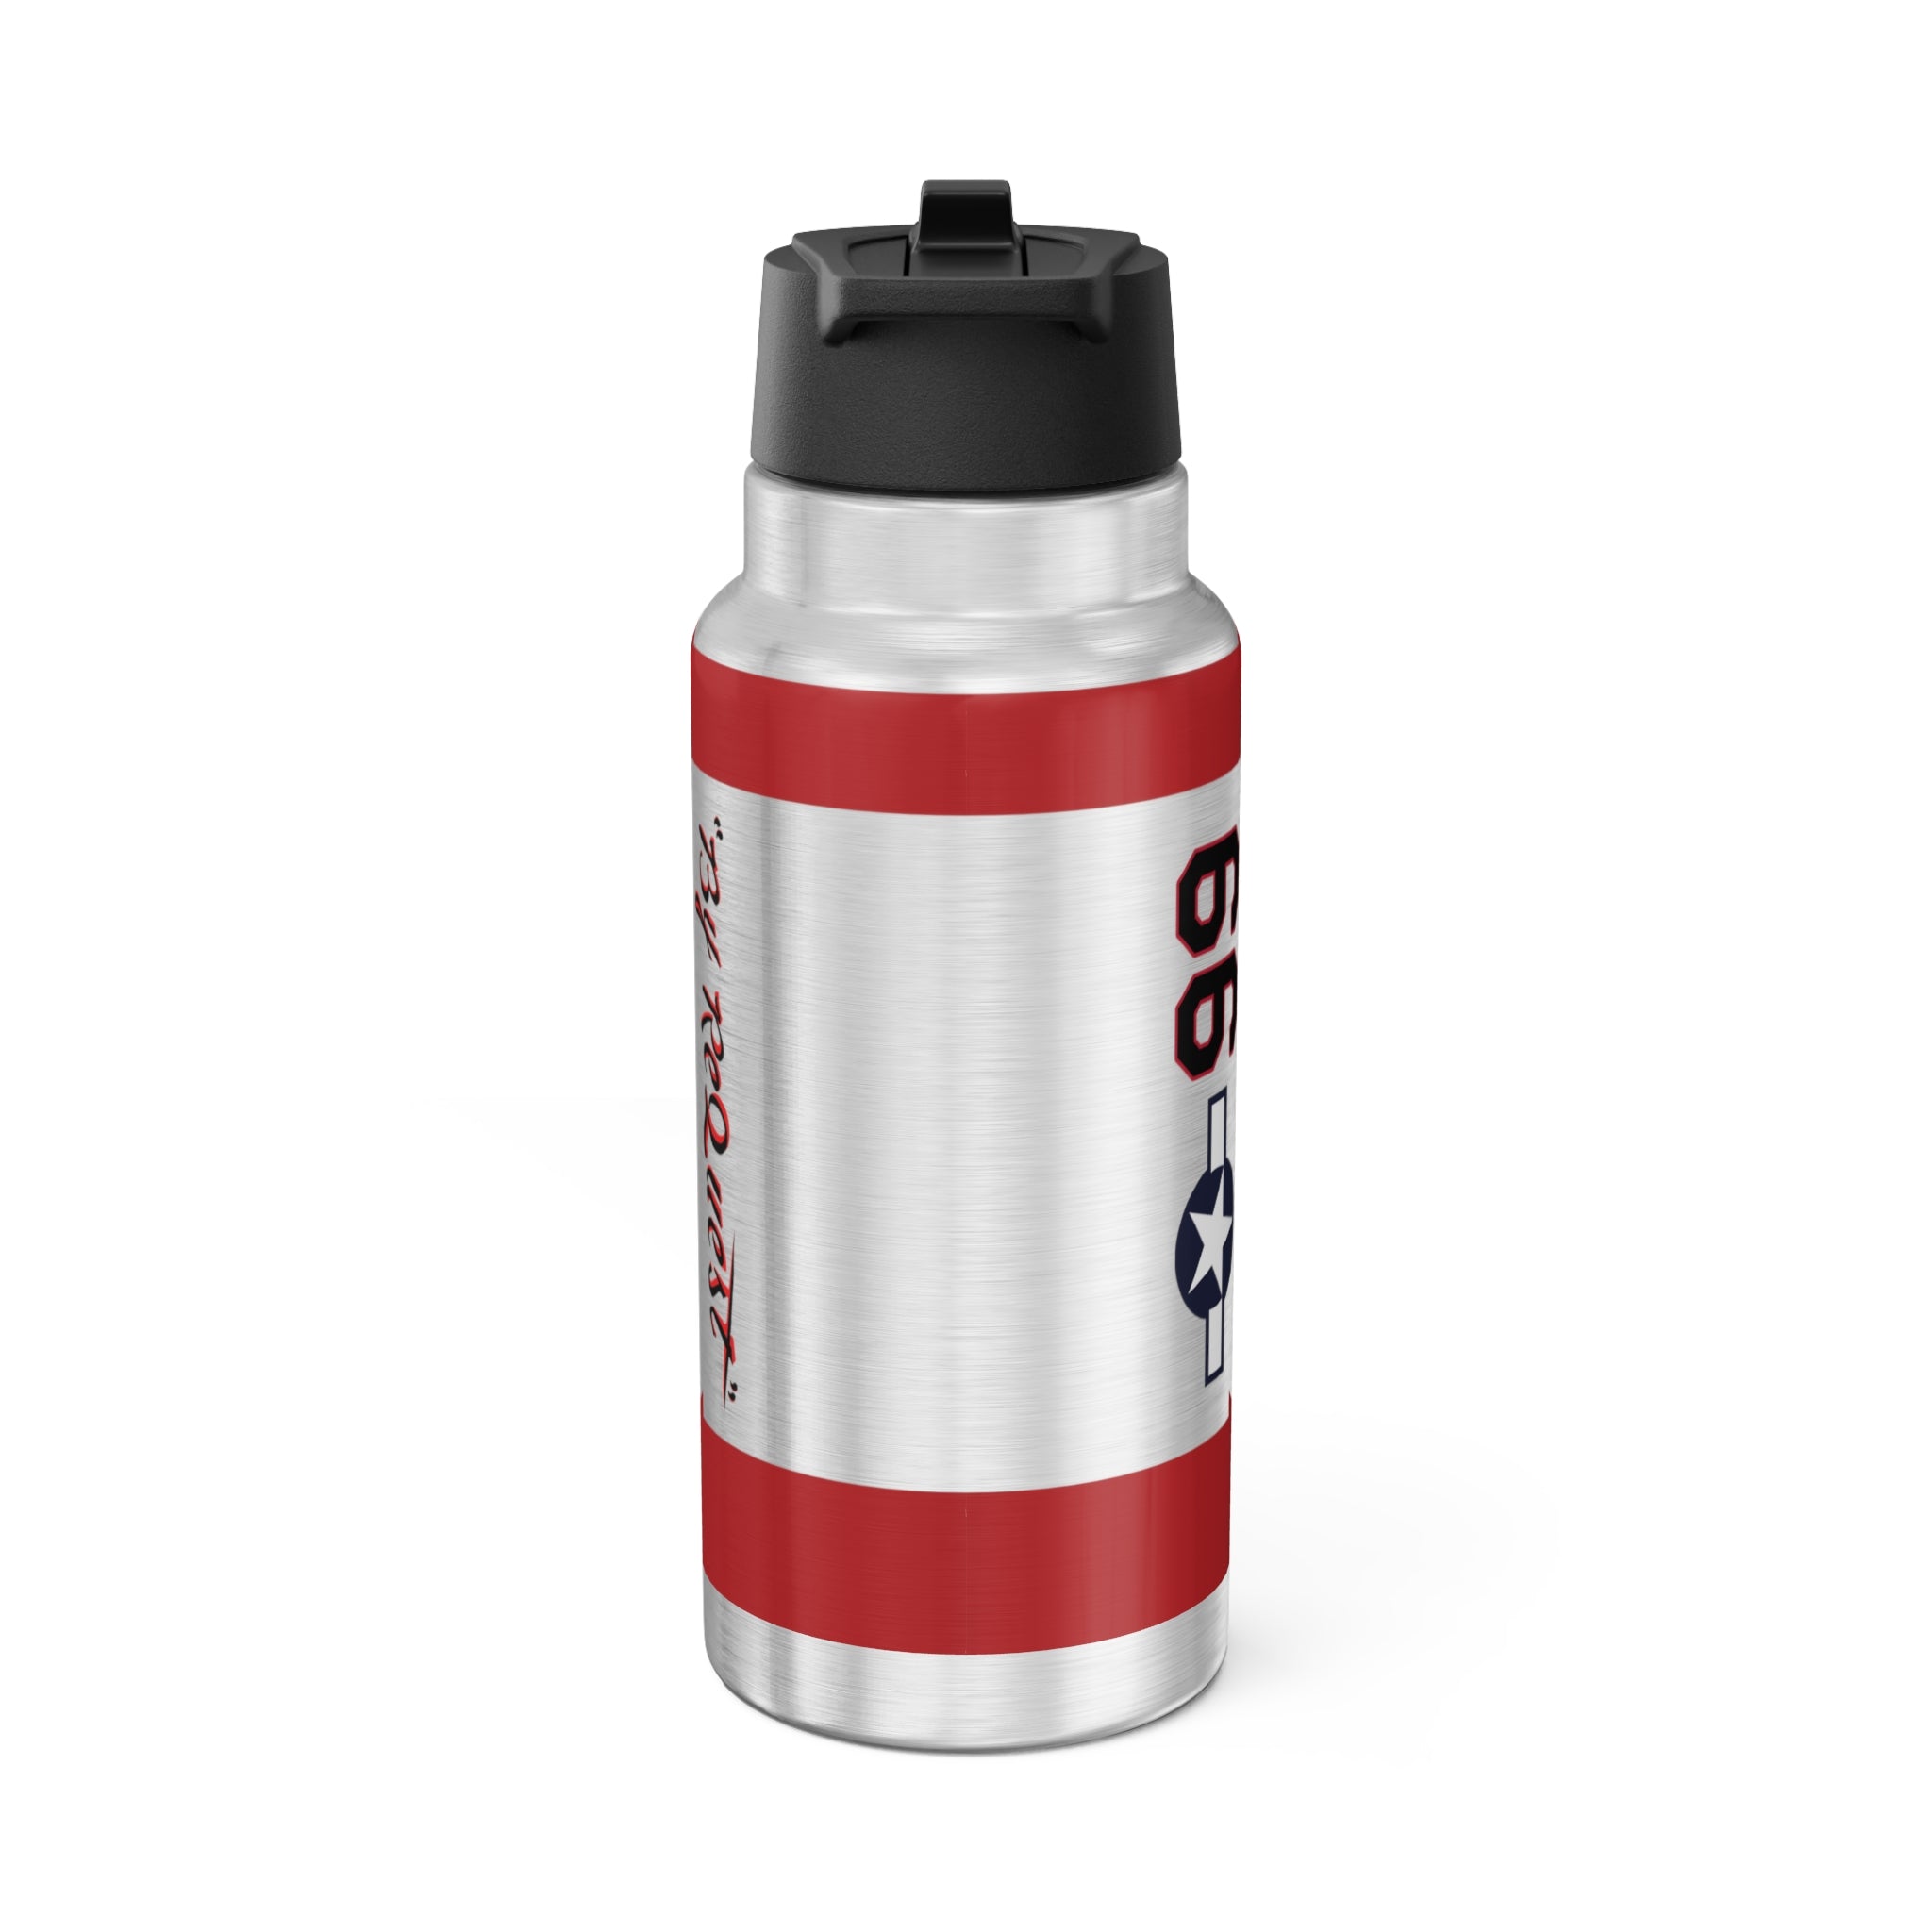 P-51 "By ReQuest" Inspired Tumbler, 32oz (950ml) - I Love a Hangar